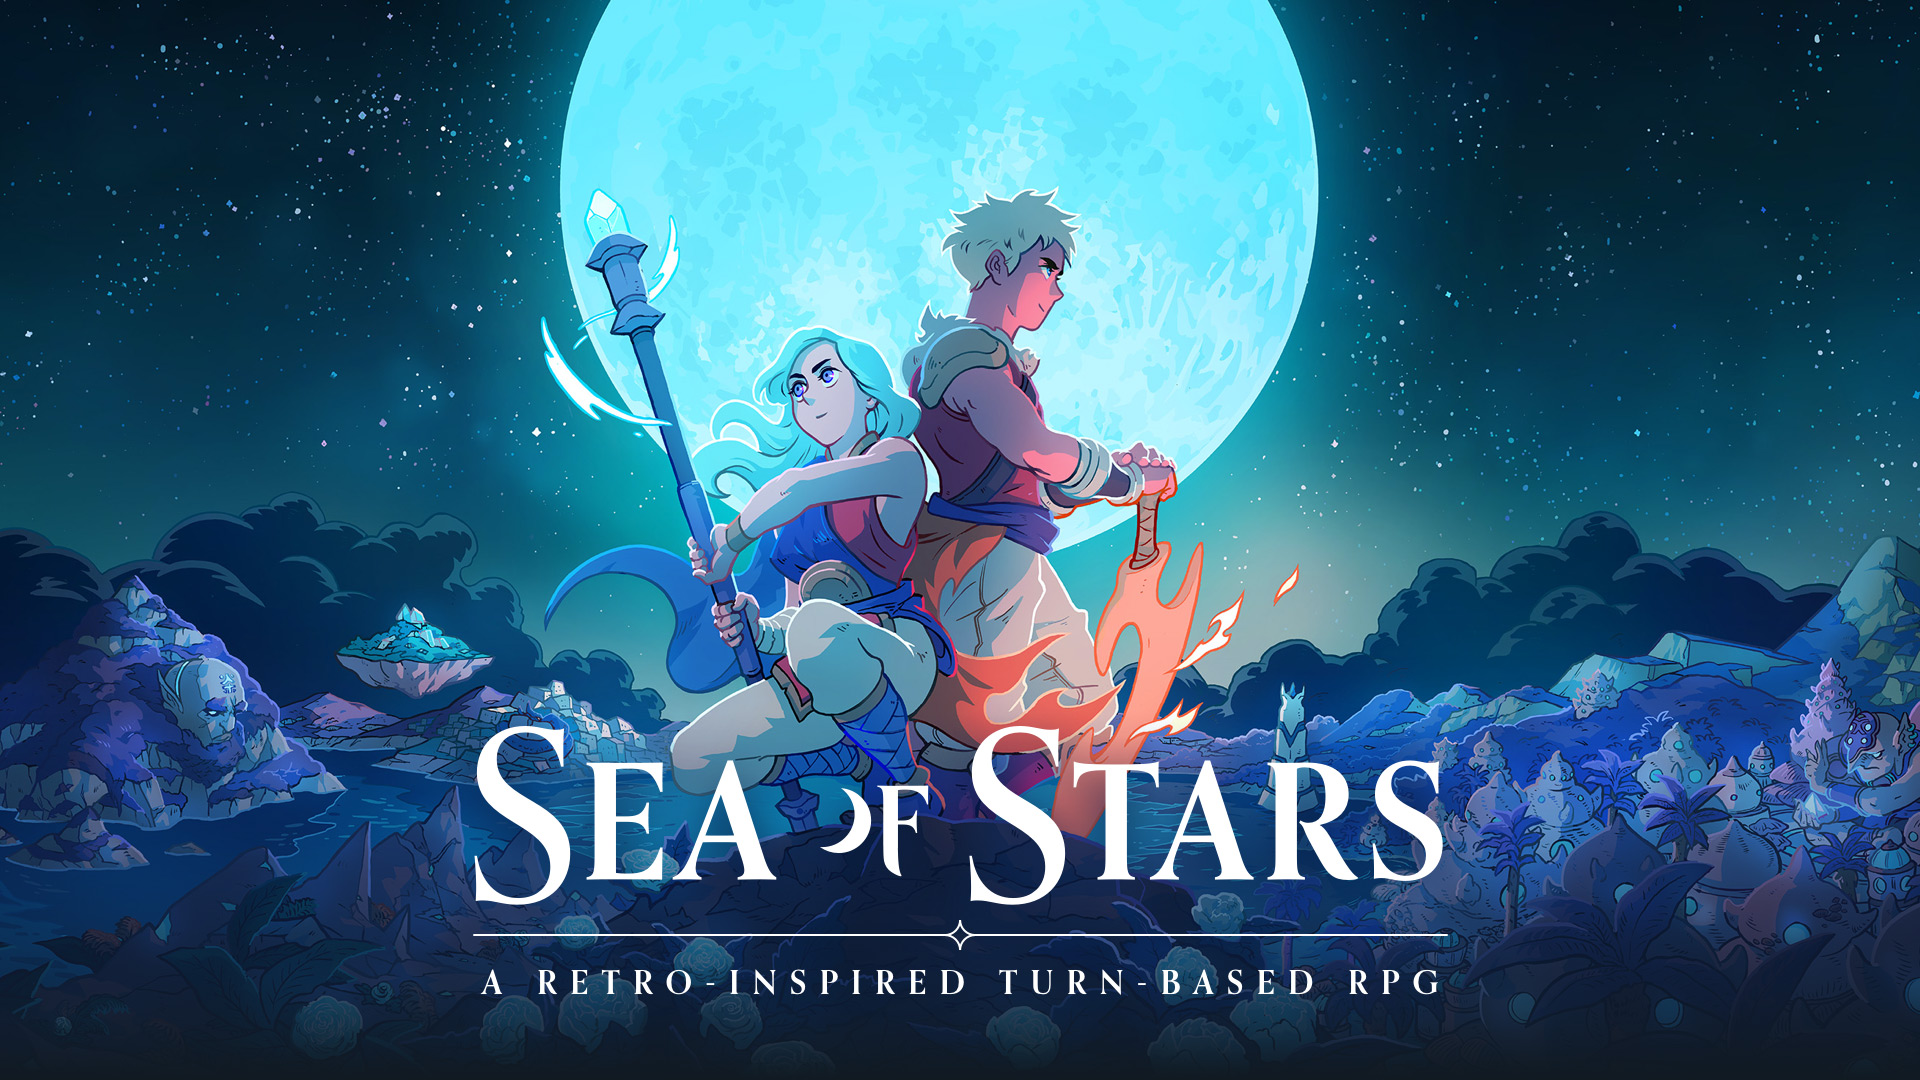 Sea of Stars will be available on PlayStation 4 and PlayStation 5 on August 29, 2023